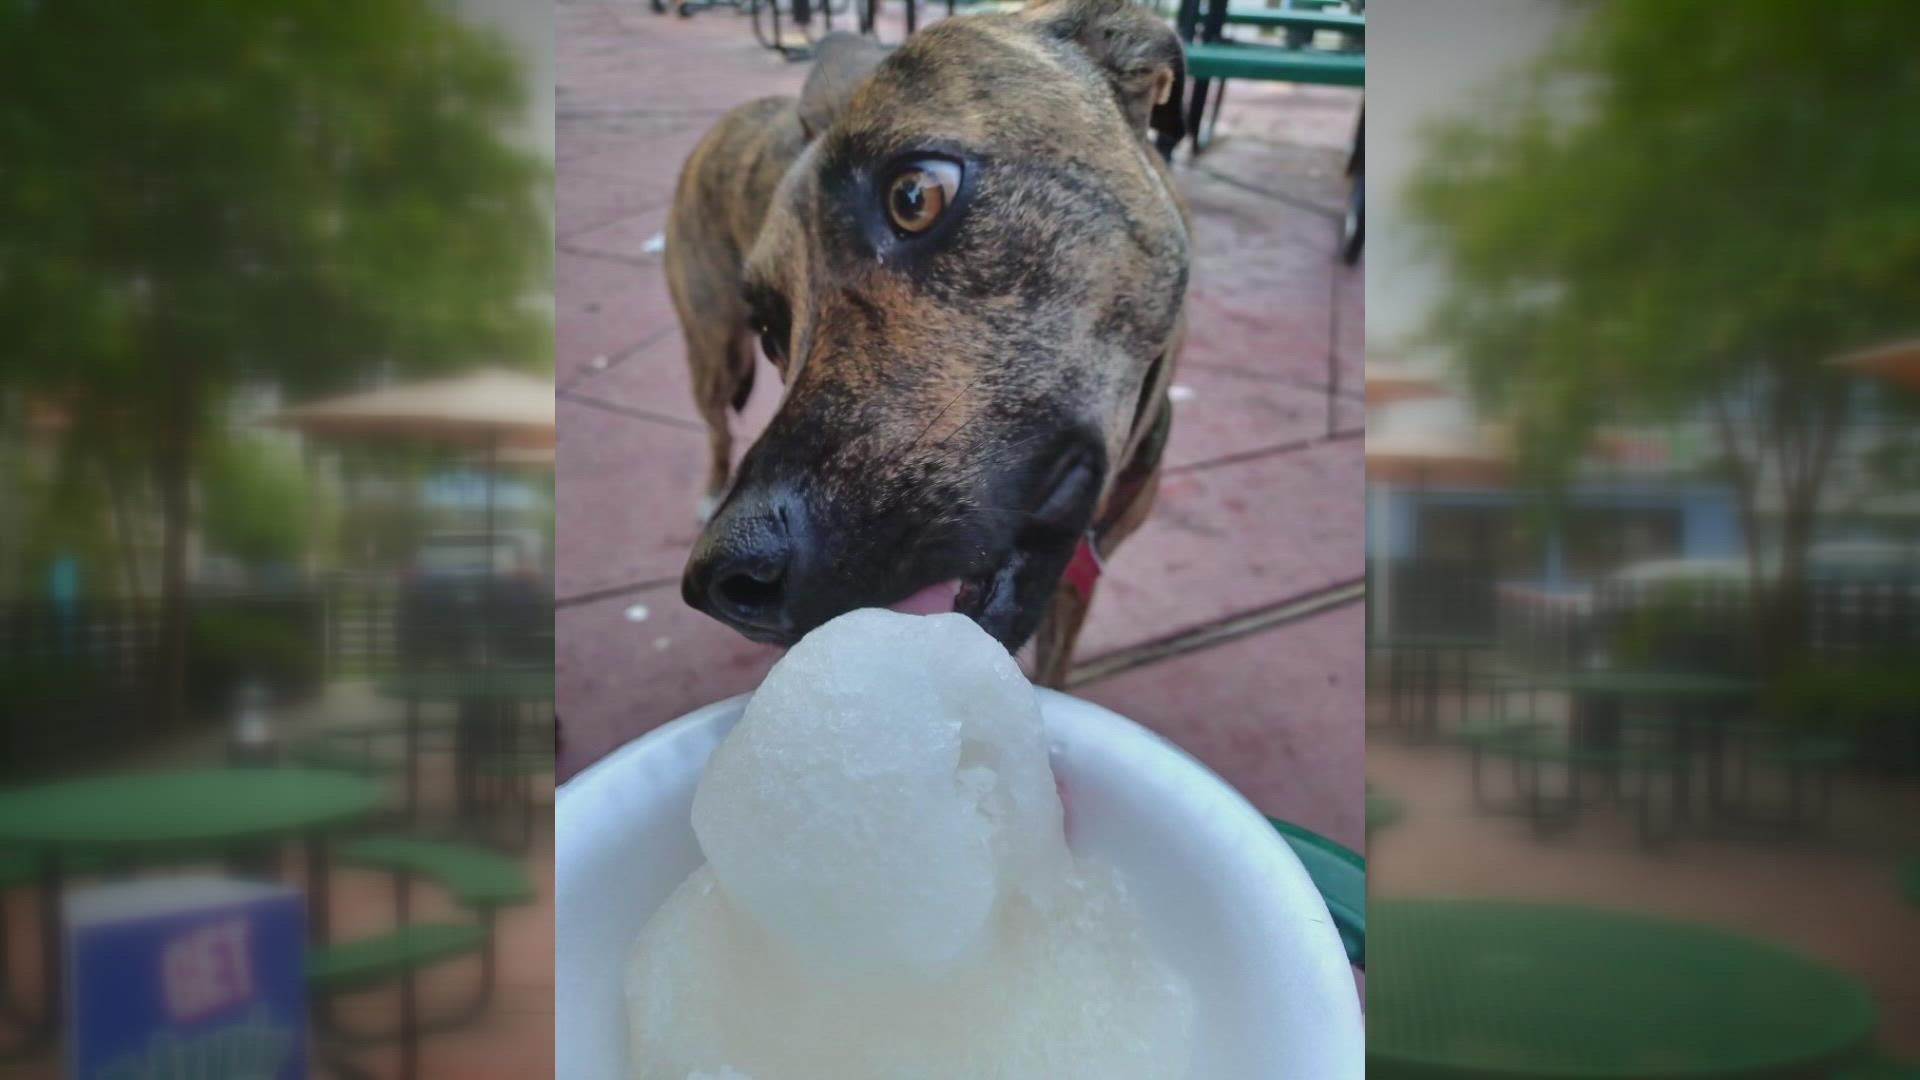 Photojournalist Adam Copus shows where you can find a frozen treat for your four-legged friend.